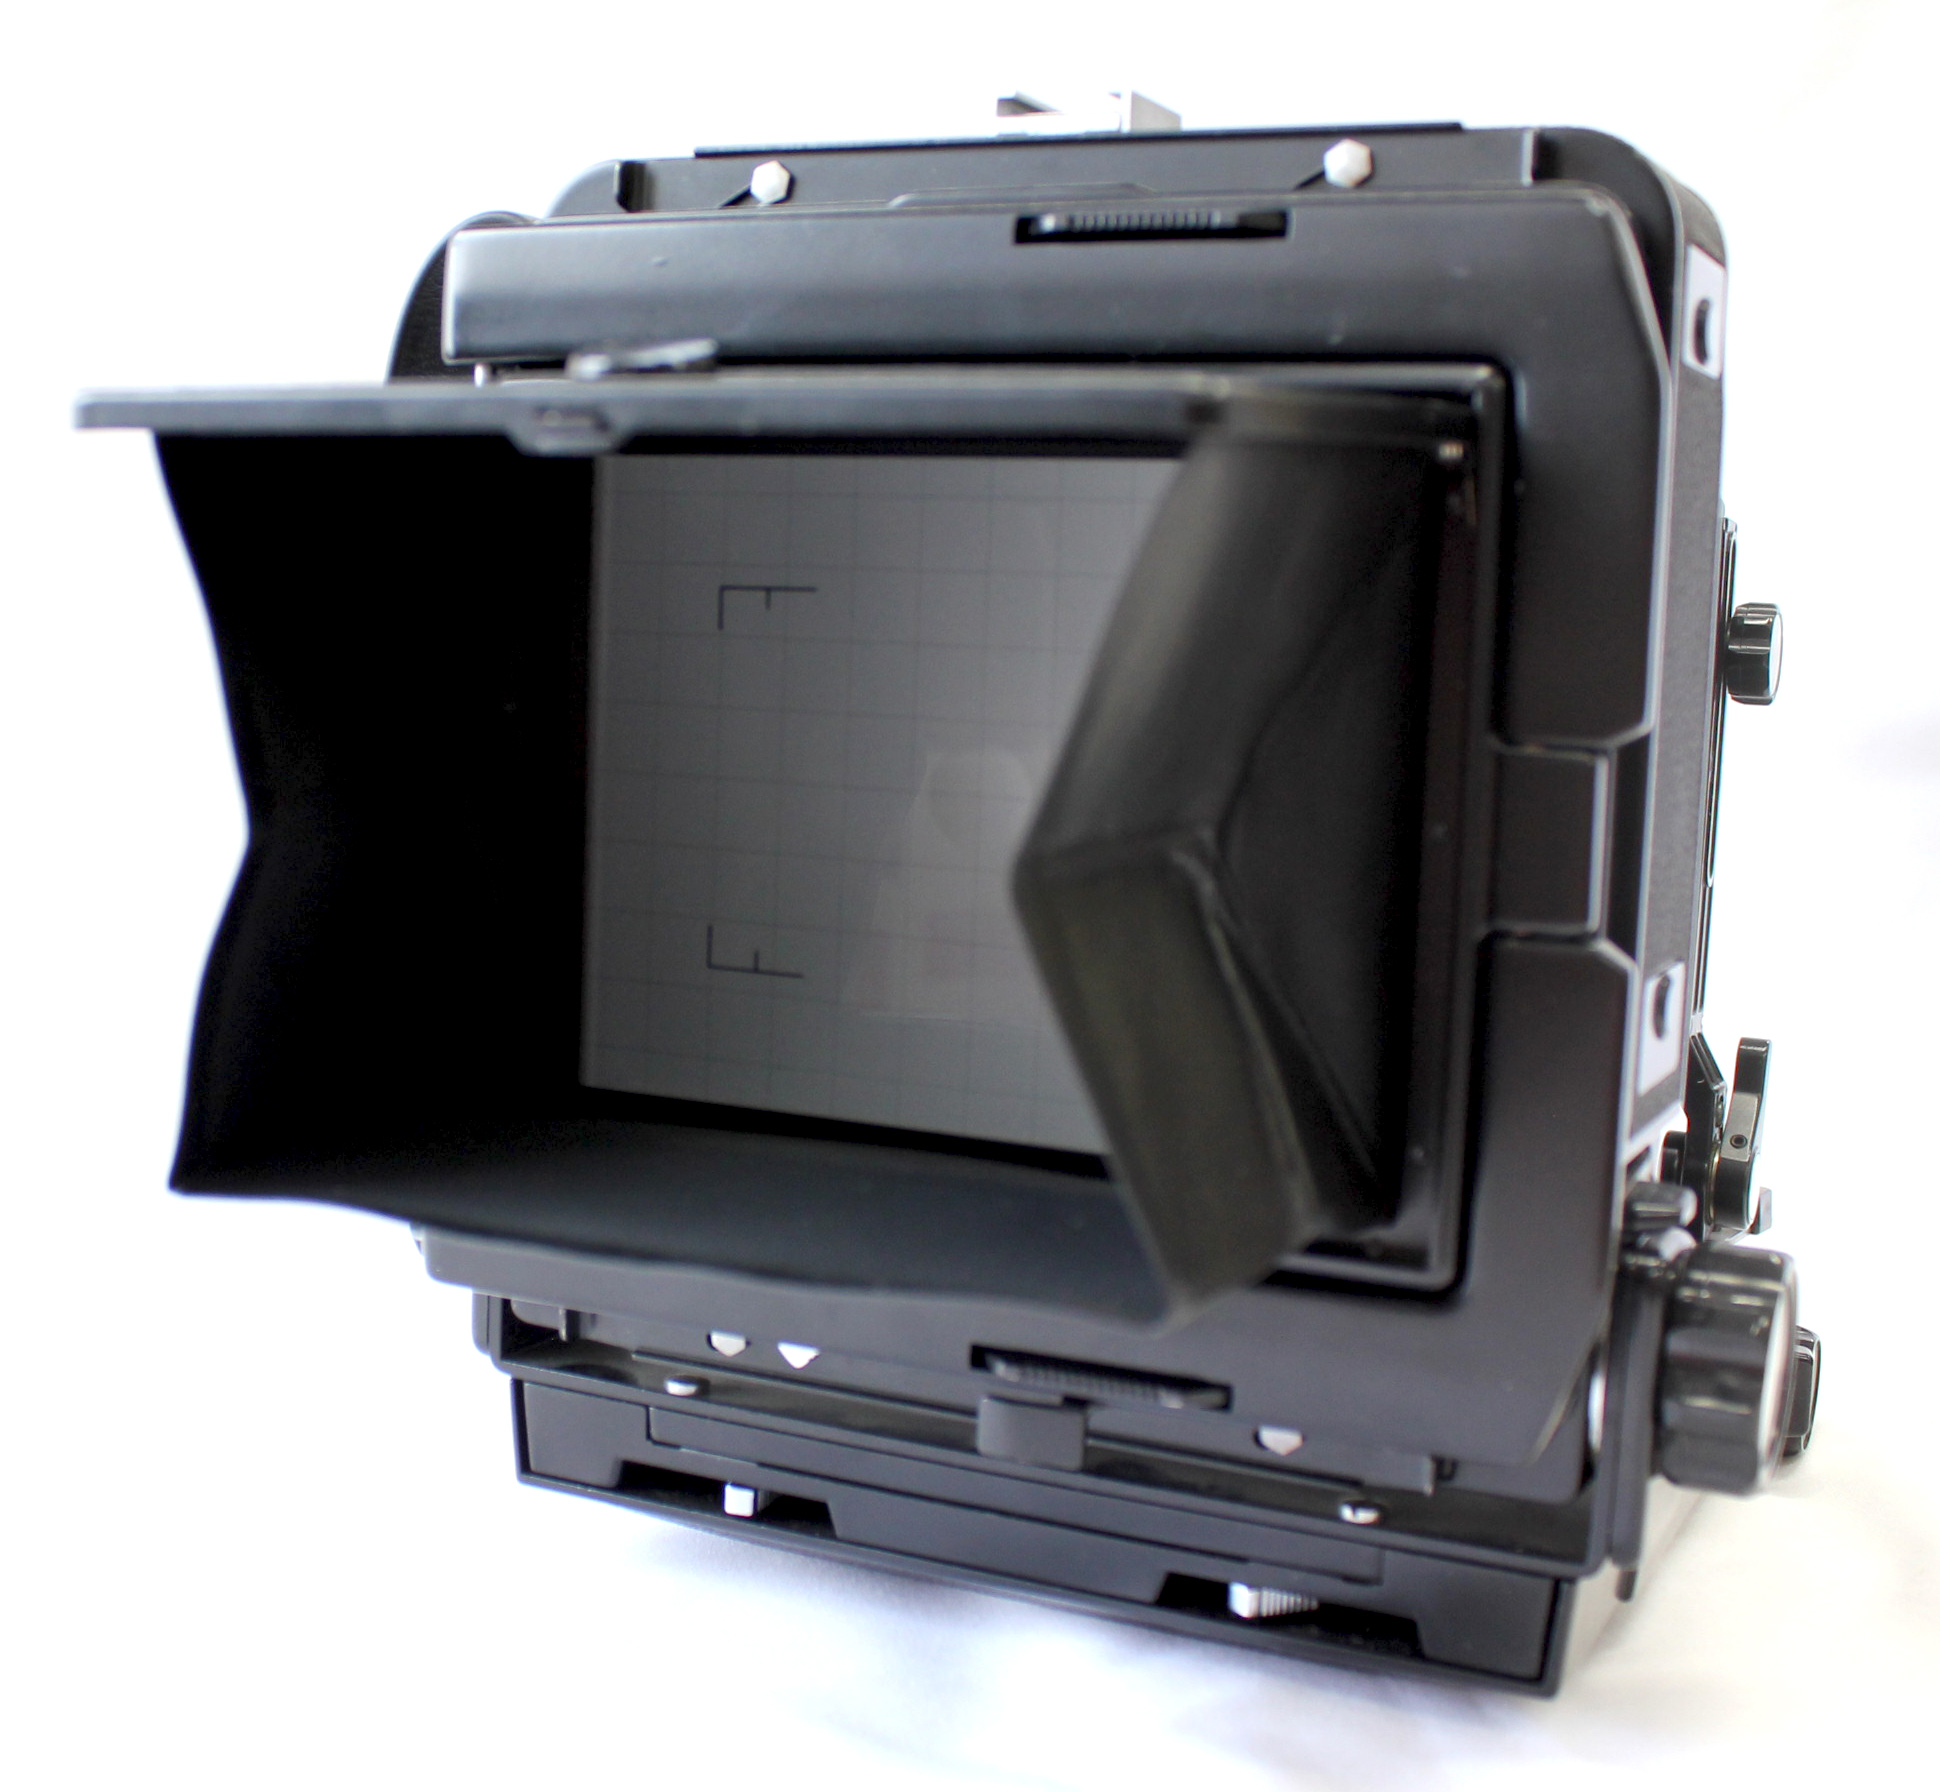  Toyo Field 45A 4x5 Large Format Film Camera with Revolving Back and 3 Cut Film Holders from Japan Photo 7